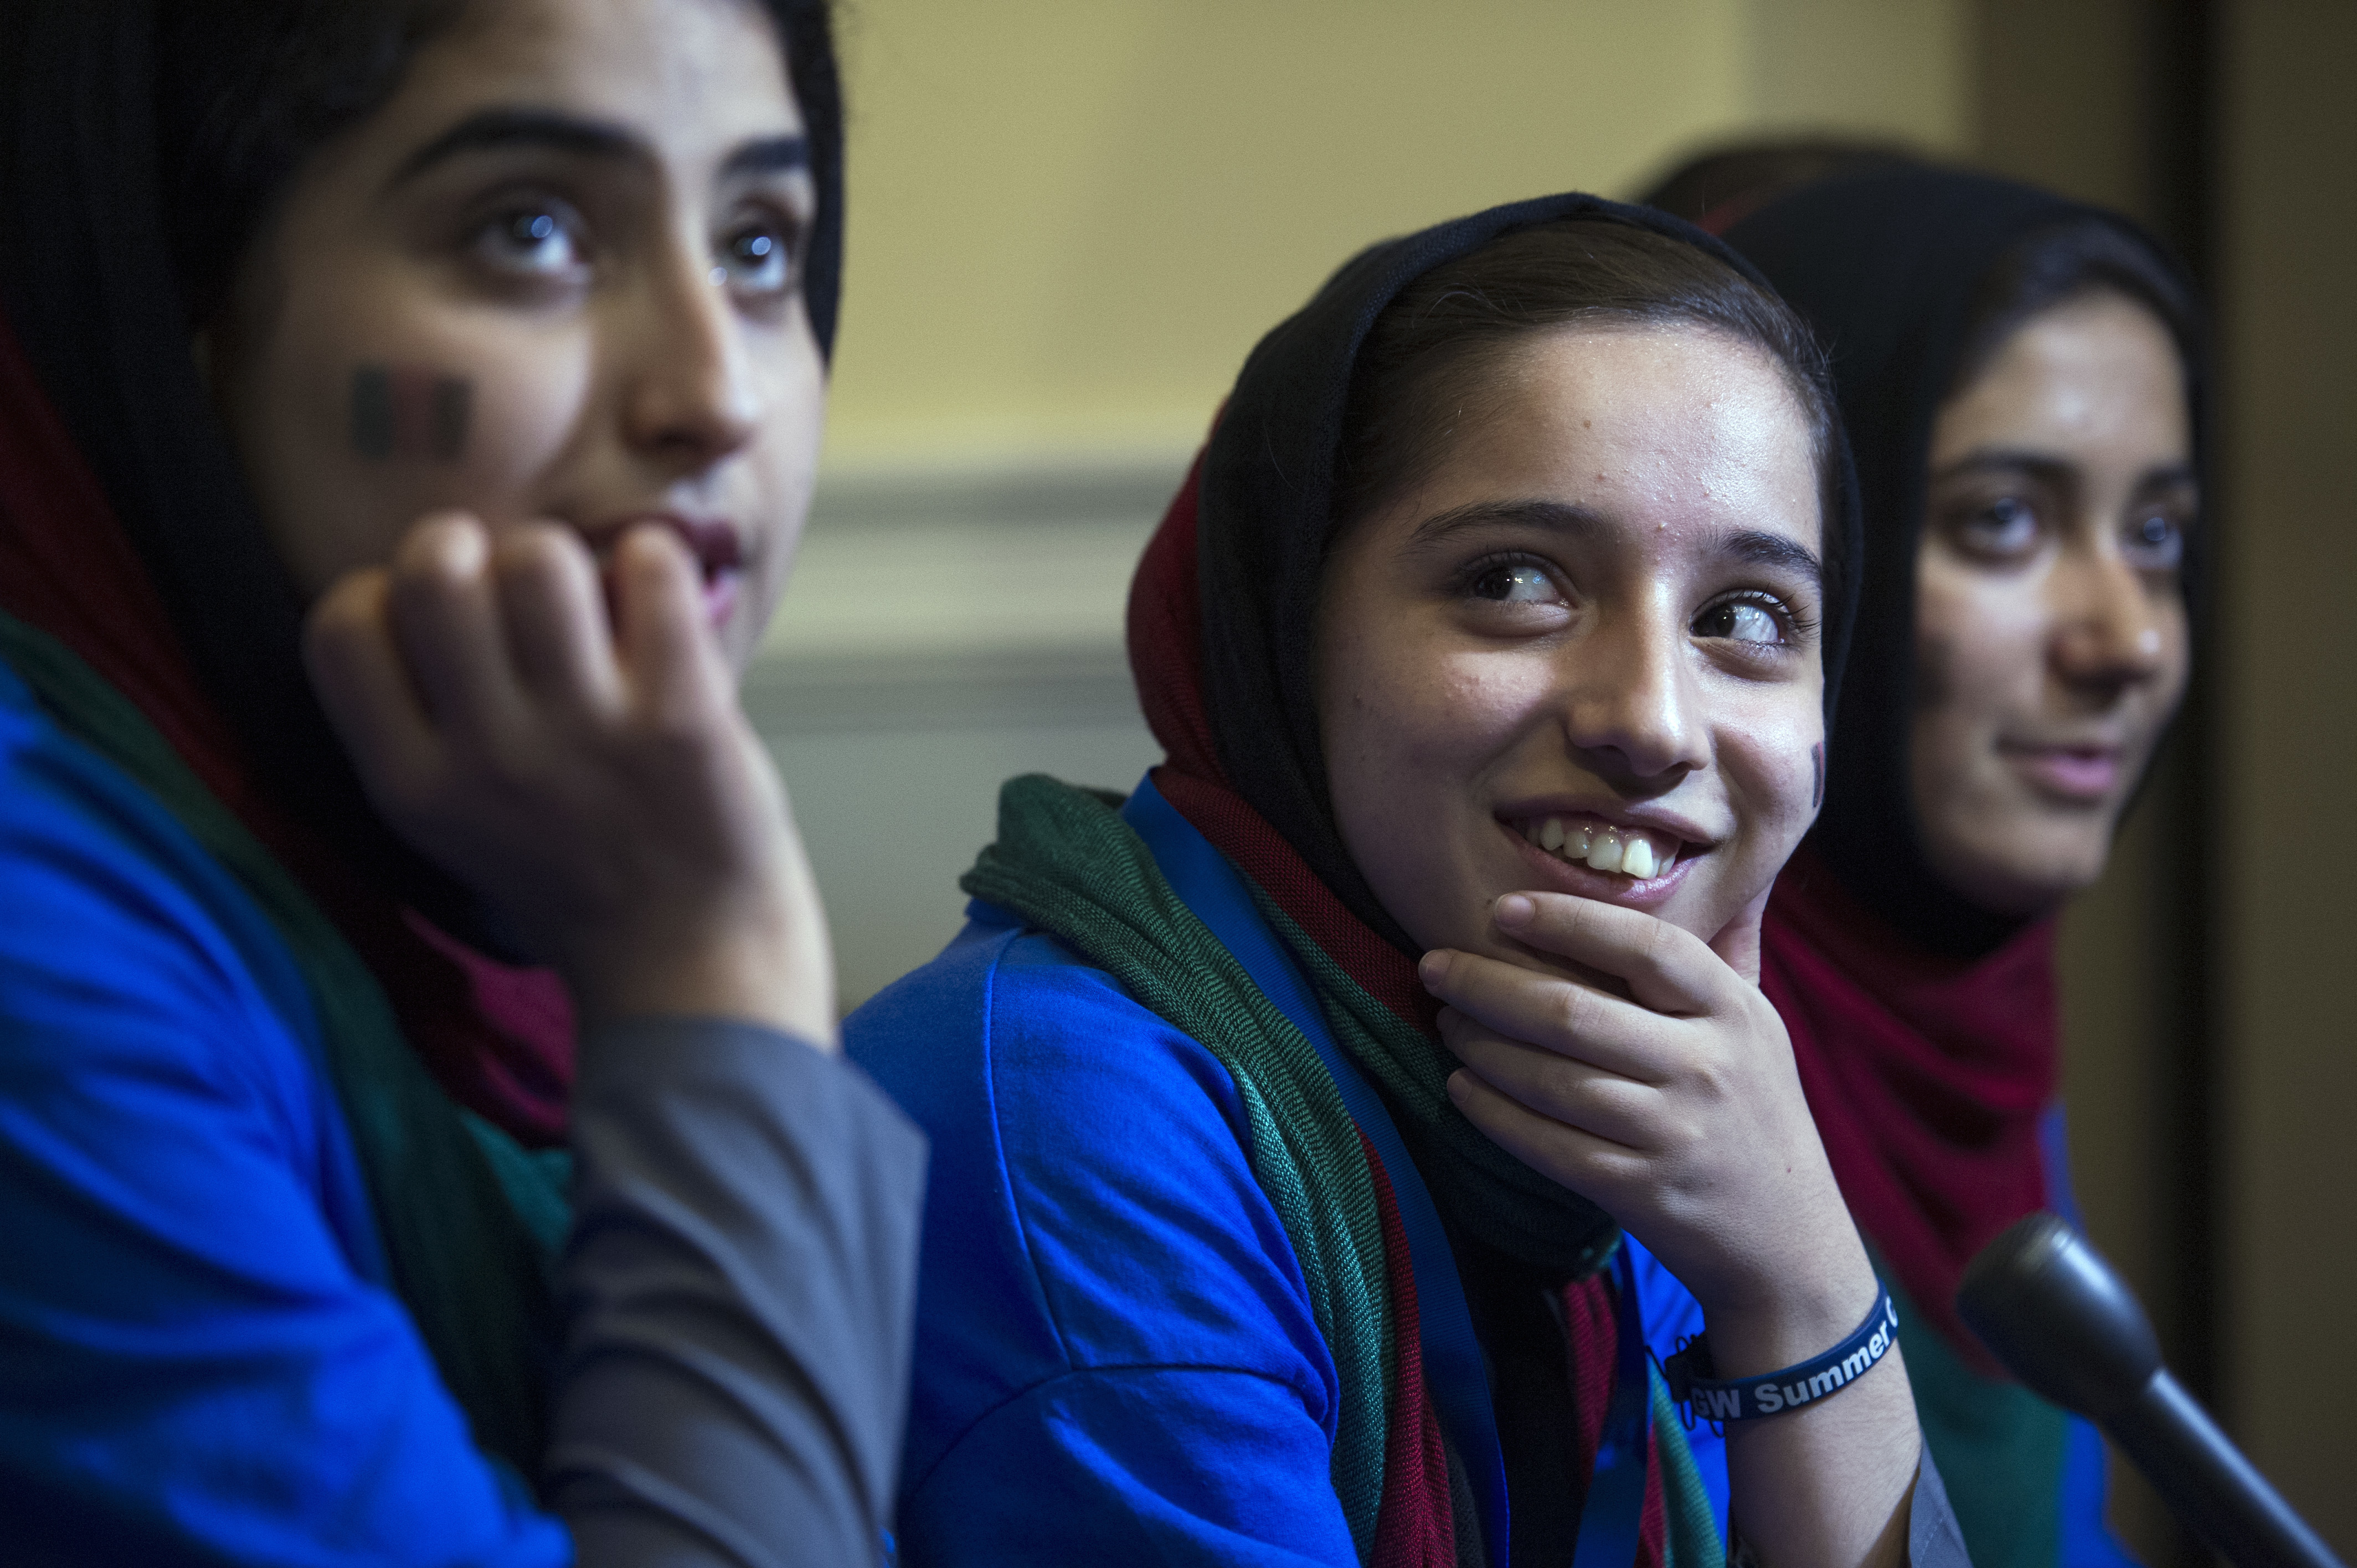 Afghanistan's FIRST Global Challenge team member Lida Azizi, from left, Fatemah Qaderyan, and Rodaba Noori meet with reporters following the opening ceremony in Washington, Sunday, July 16, 2017. Twice rejected for U.S. visas, the all-girls robotics team arrived in Washington on Saturday and will compete against entrants from more than 150 countries in the three-day high school competition. It's the first annual robotics competition designed to encourage youths to pursue careers in math and science. (AP Photo/Cliff Owen)